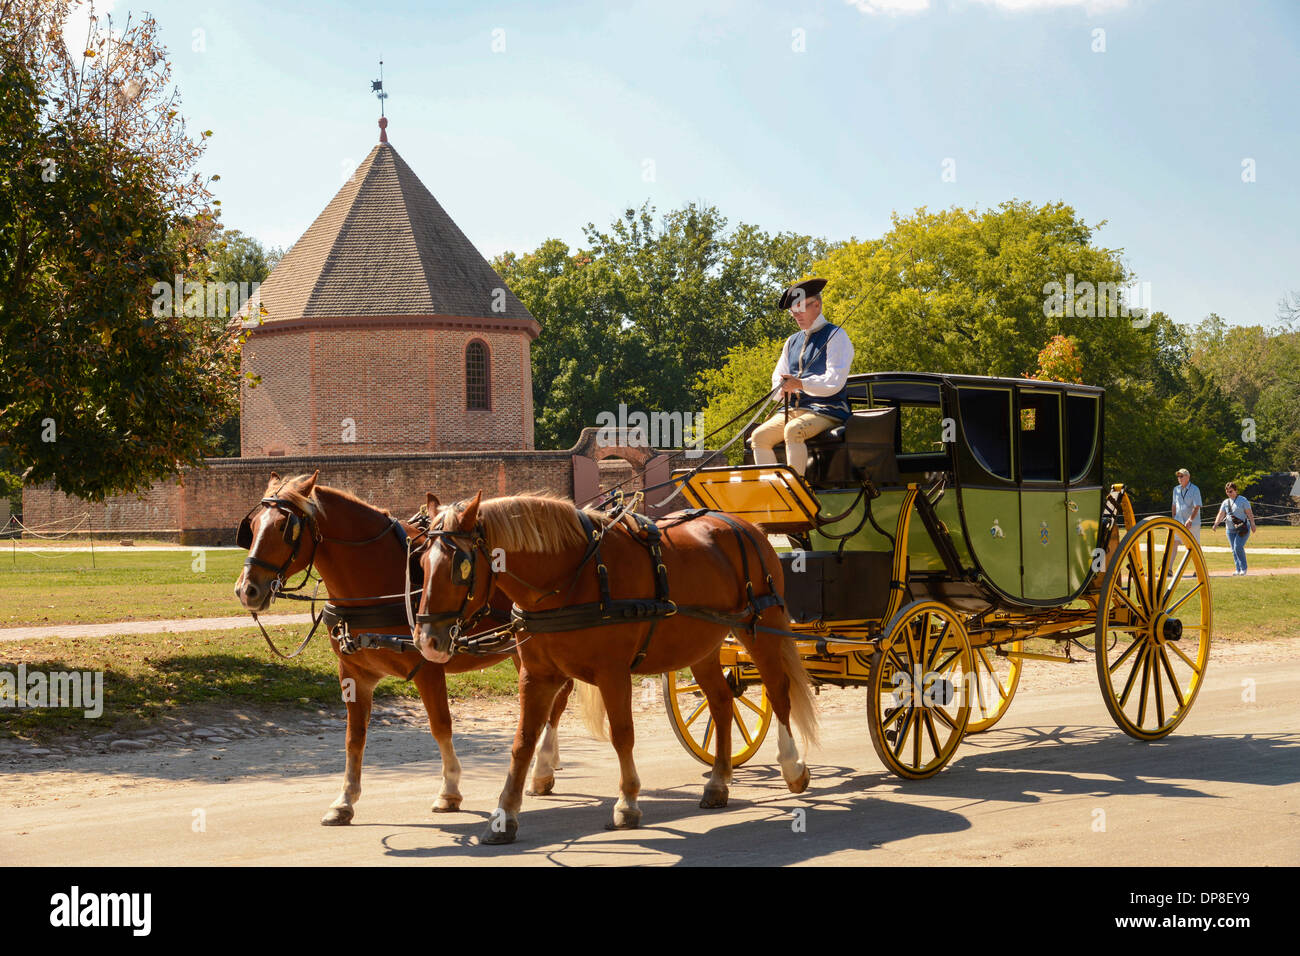 Colonial Williamsburg horse drawn carriage recreates 18th century transportation in town Stock Photo